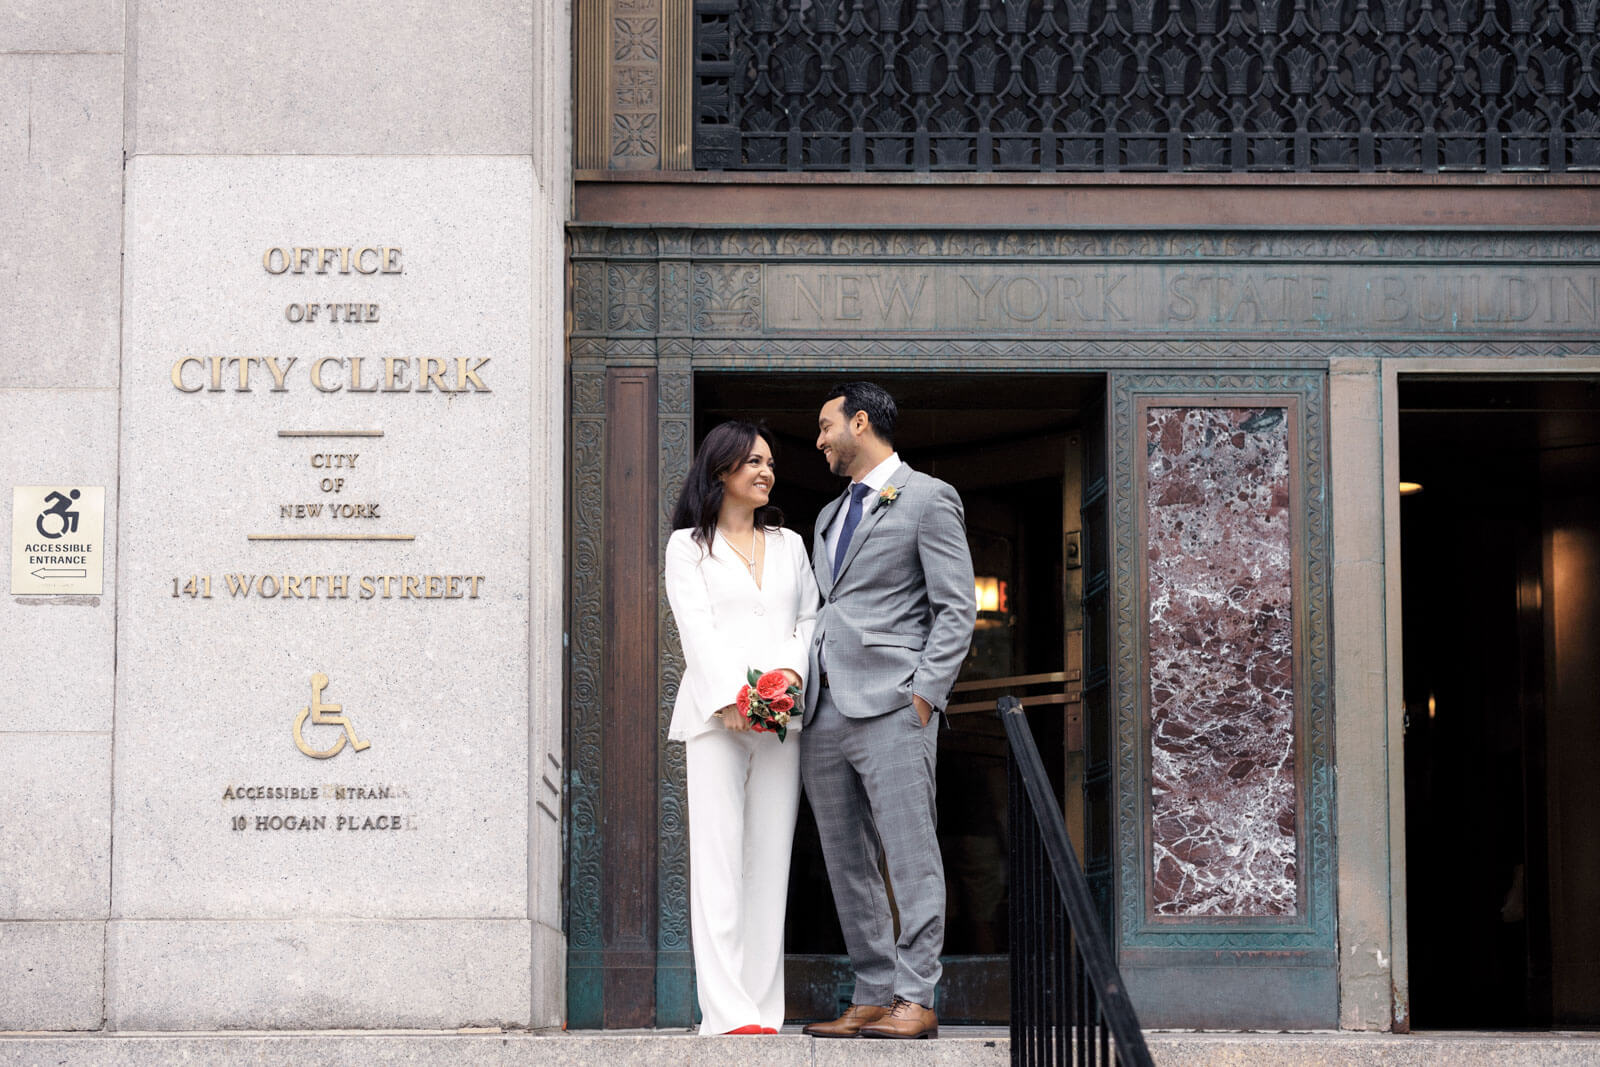 The bride and the groom are standing in front of the Office of the City Clerk Building in 141 Worth Street, New York City.